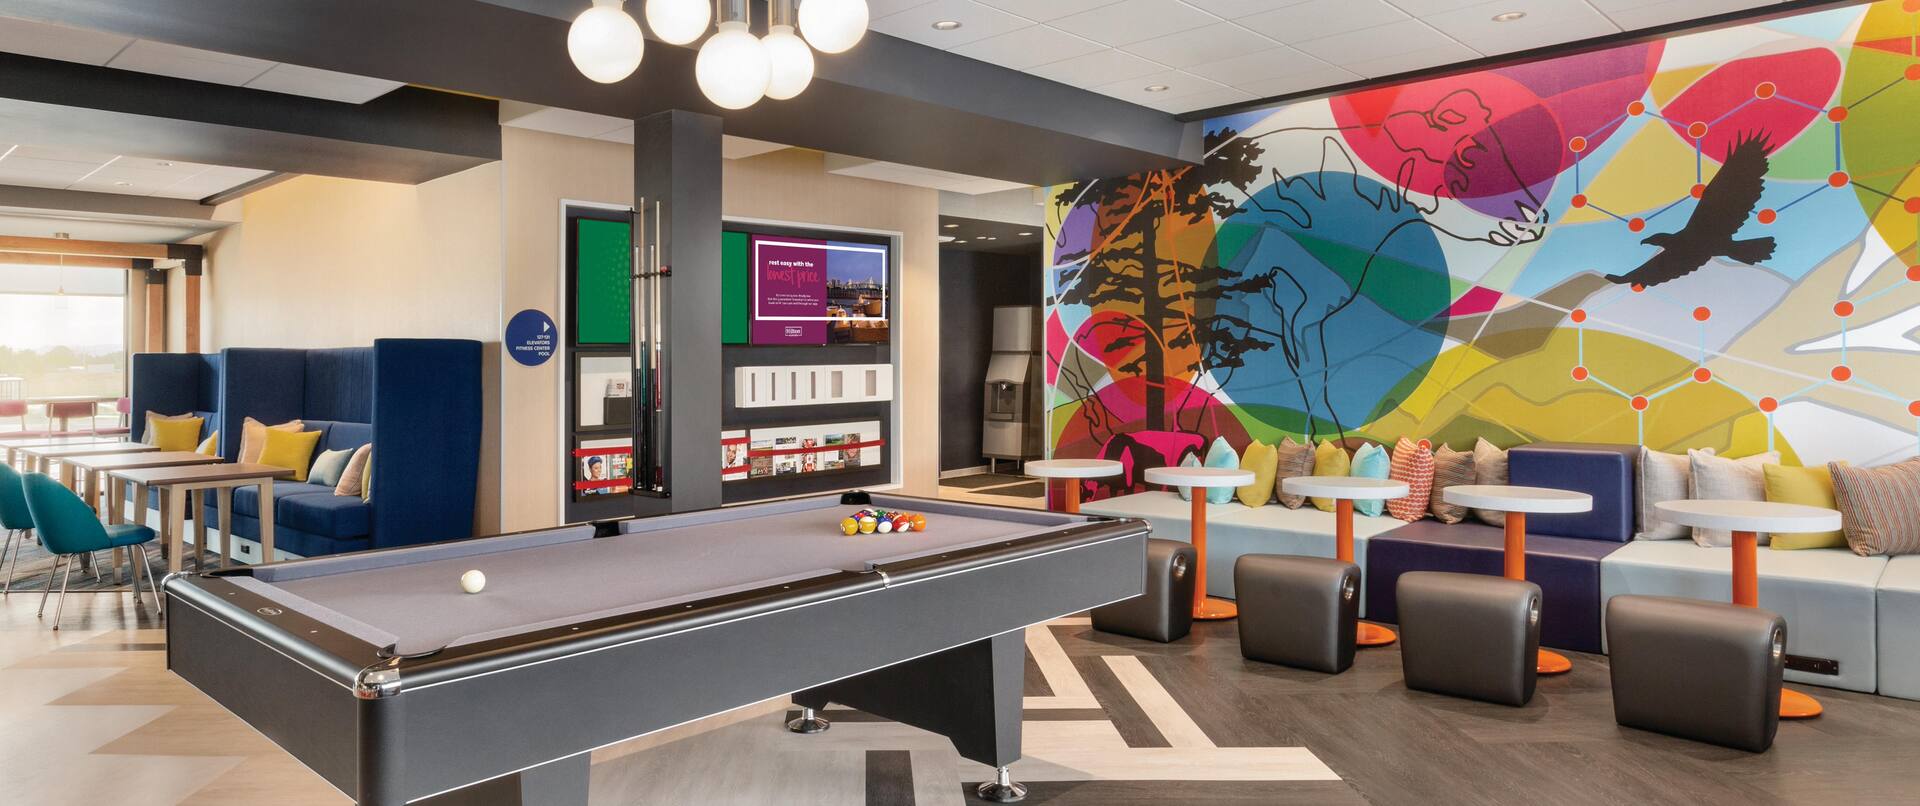 Lobby Play Area with Pool Table